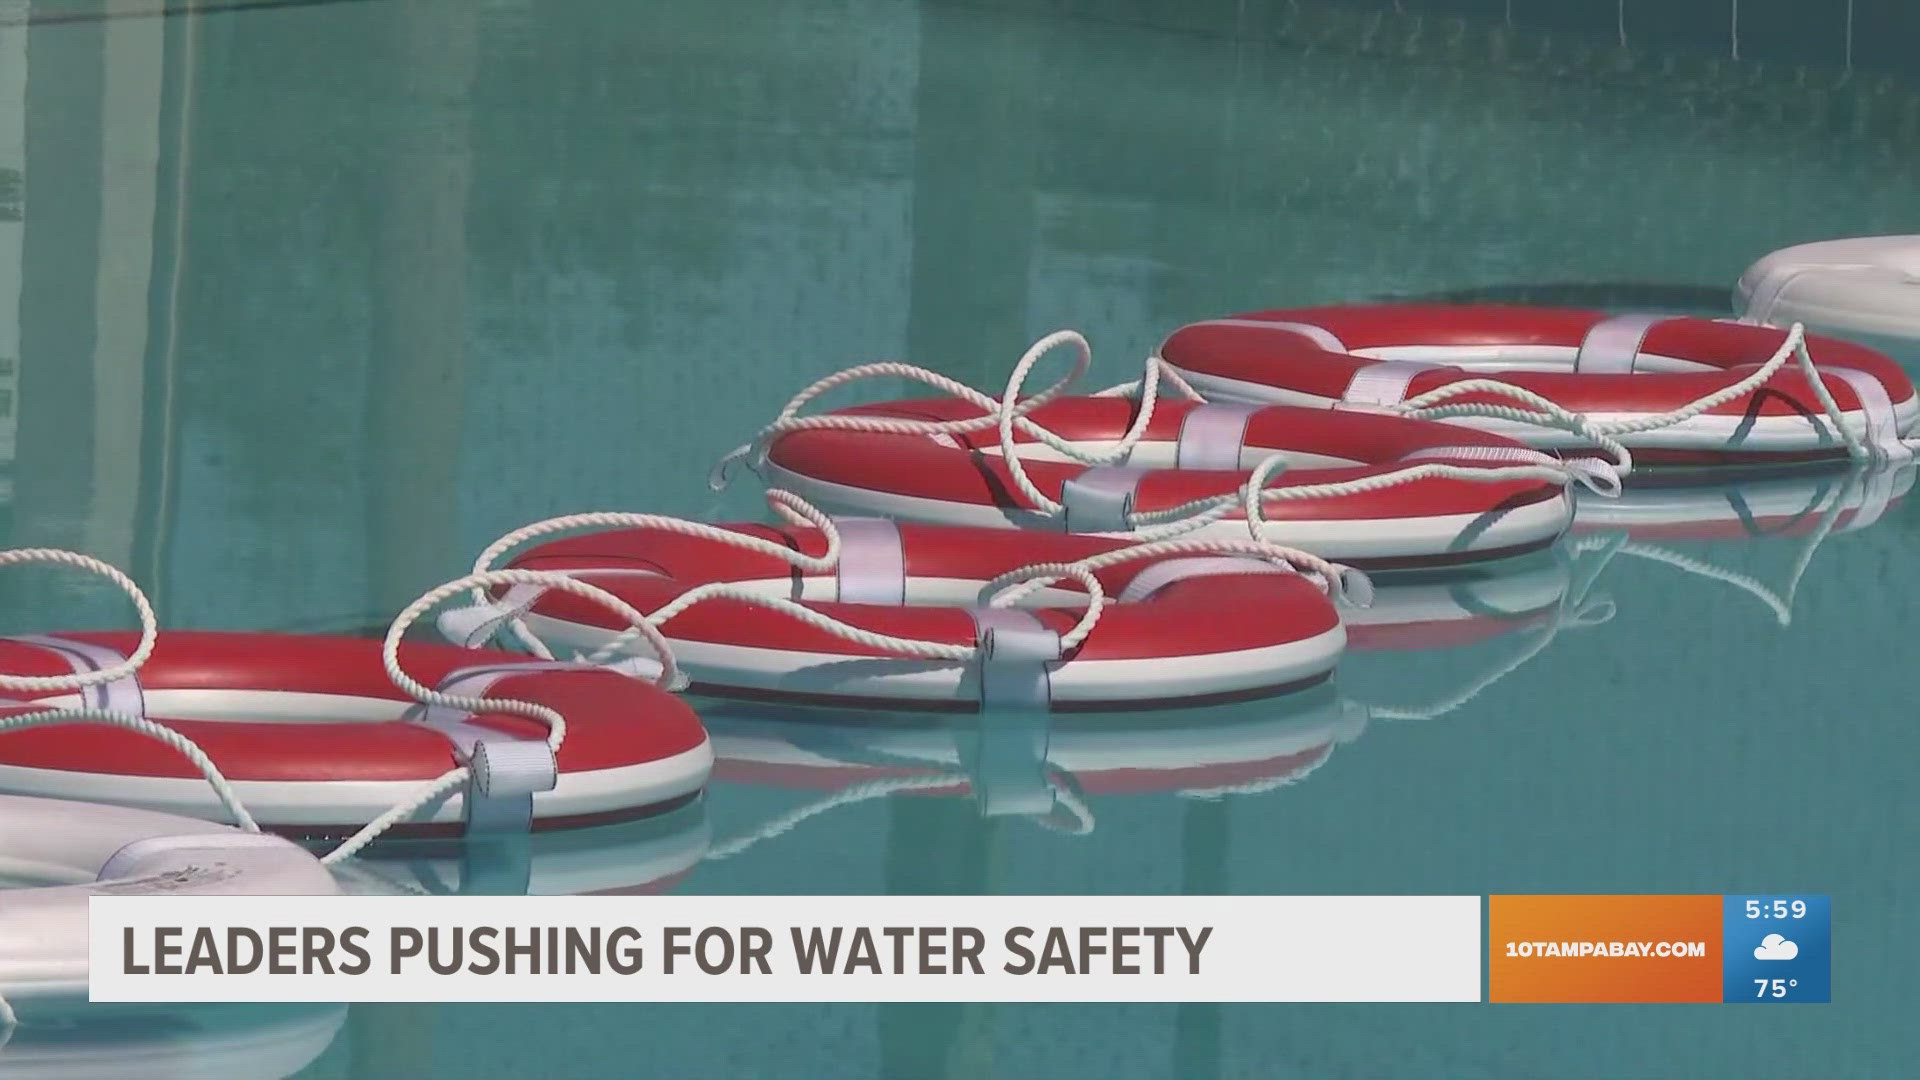 Local leaders say they want to make sure people know how to swim. Pinellas County will be giving out swim vouchers, vests and teach CPR for free on Saturday.